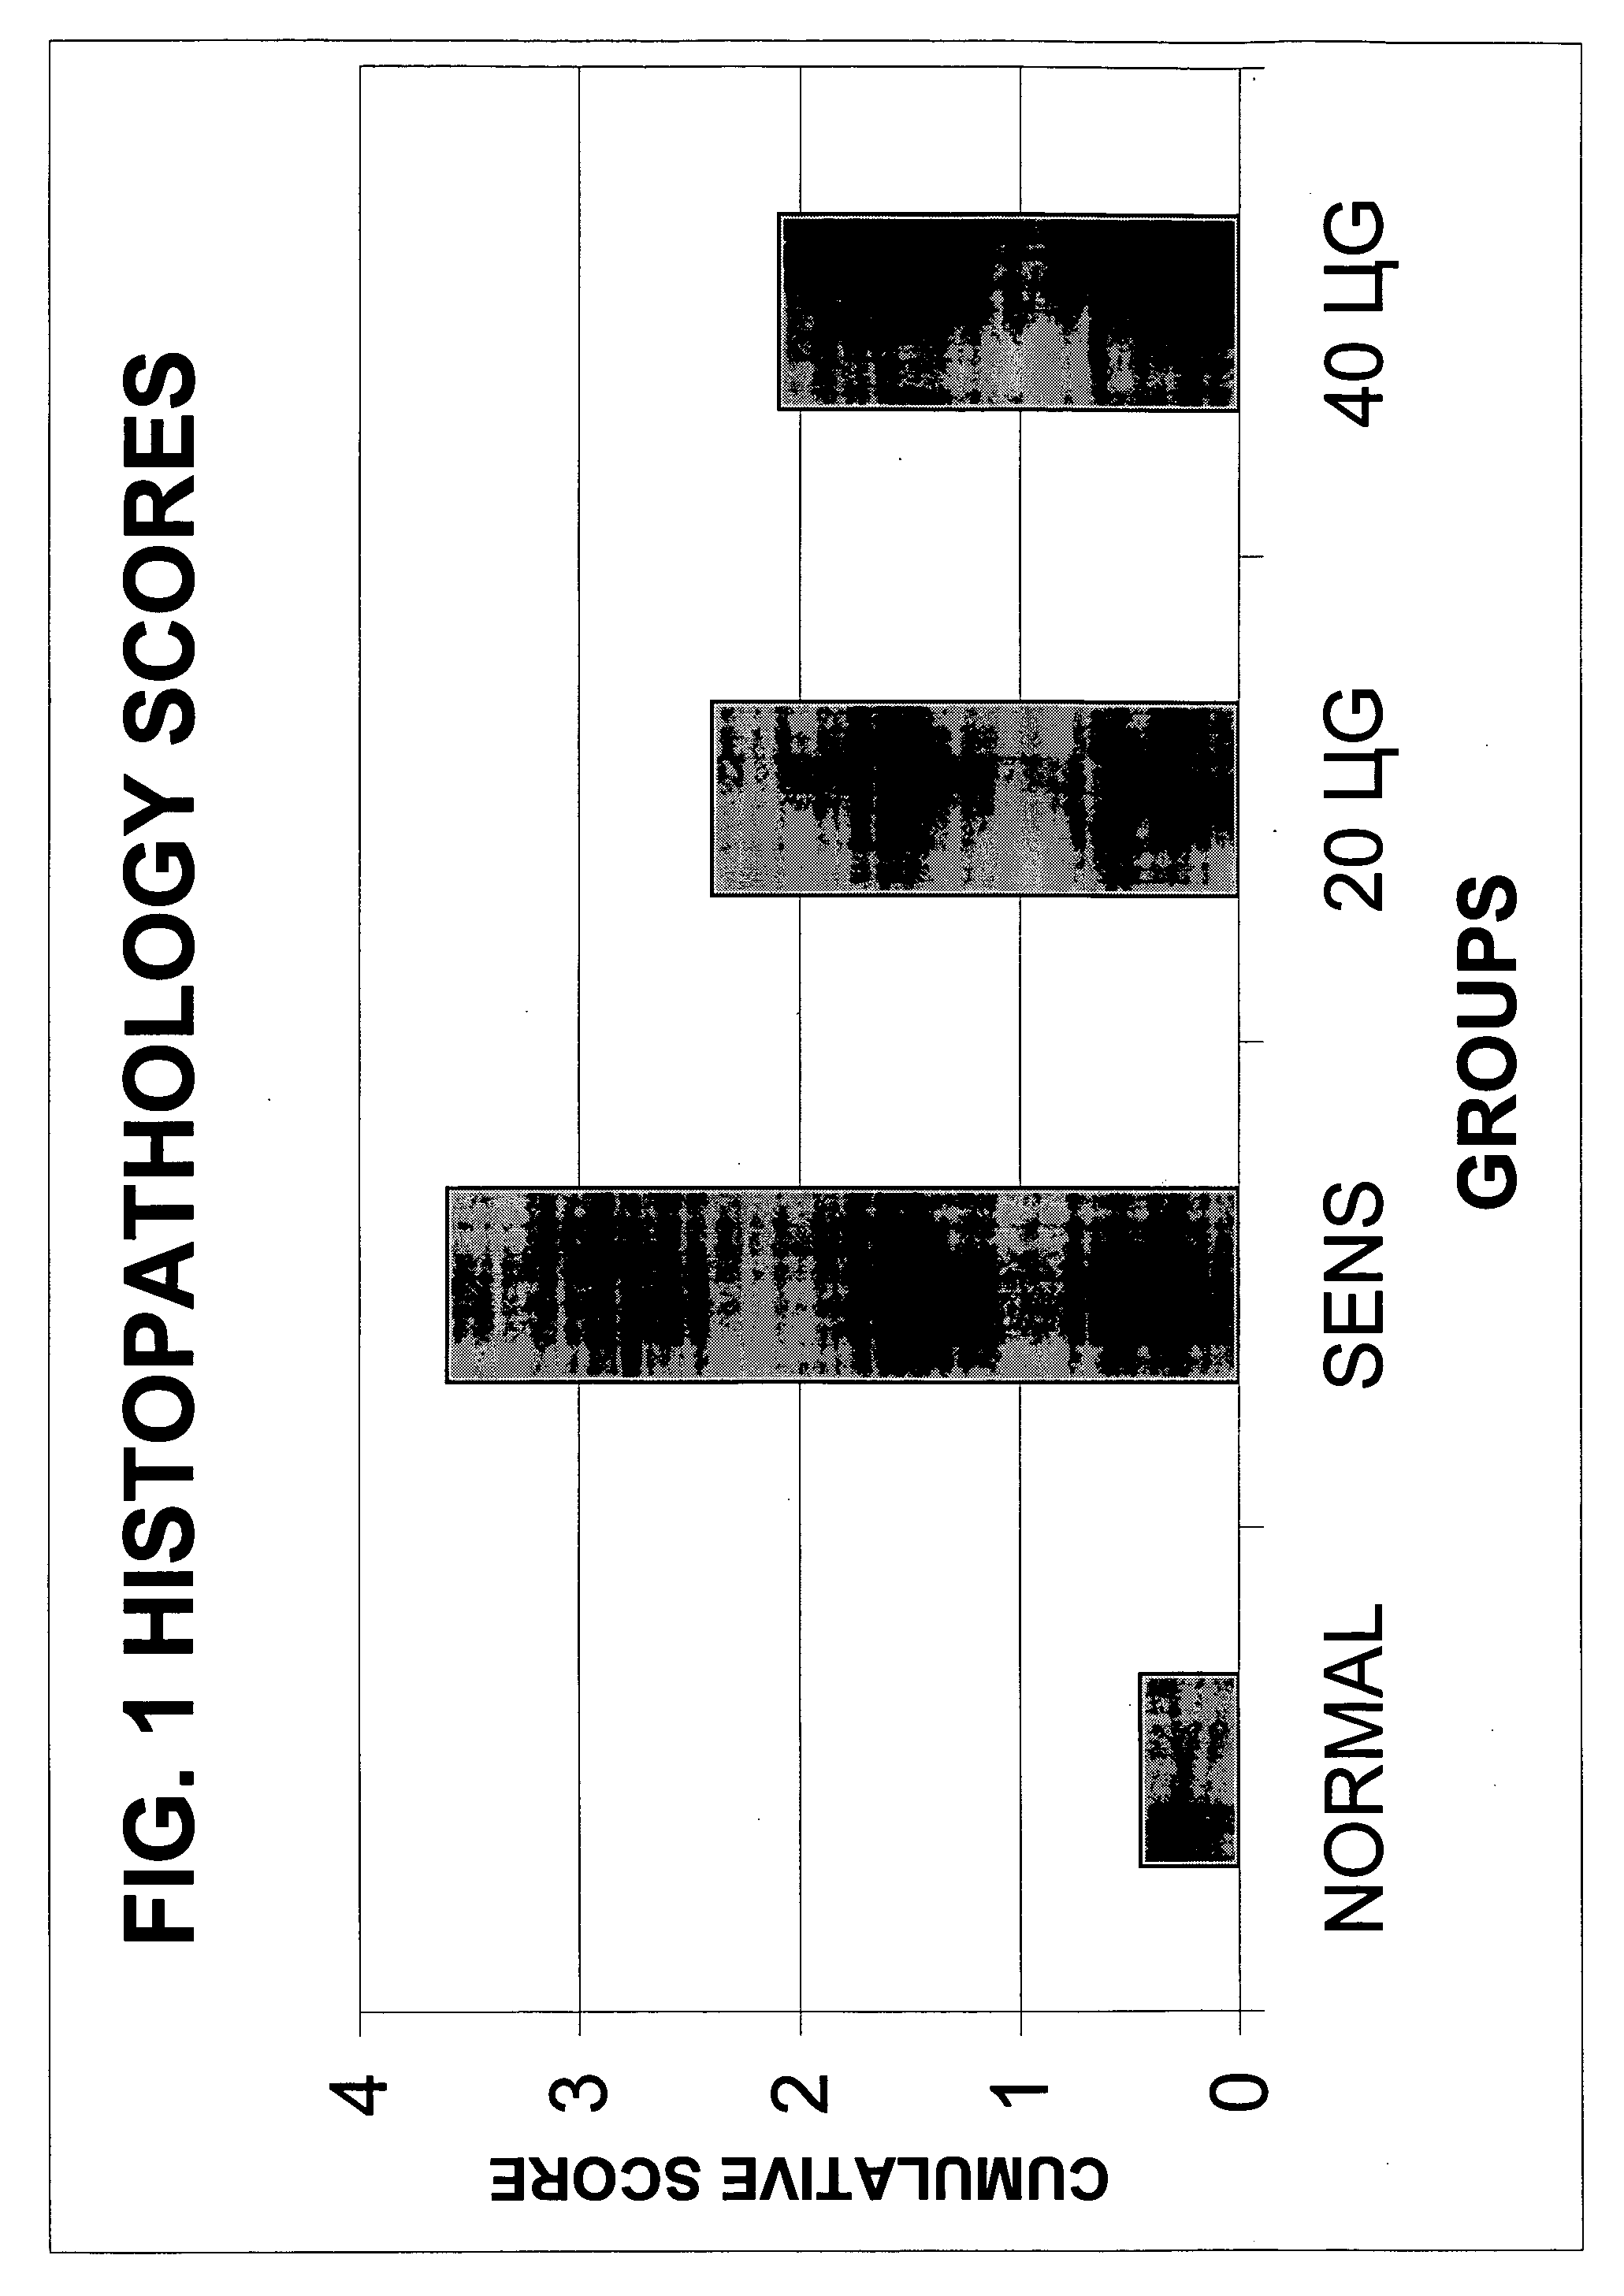 Sterically stabilized liposome and triamcinolone composition for treating the respiratory tract of a mammal